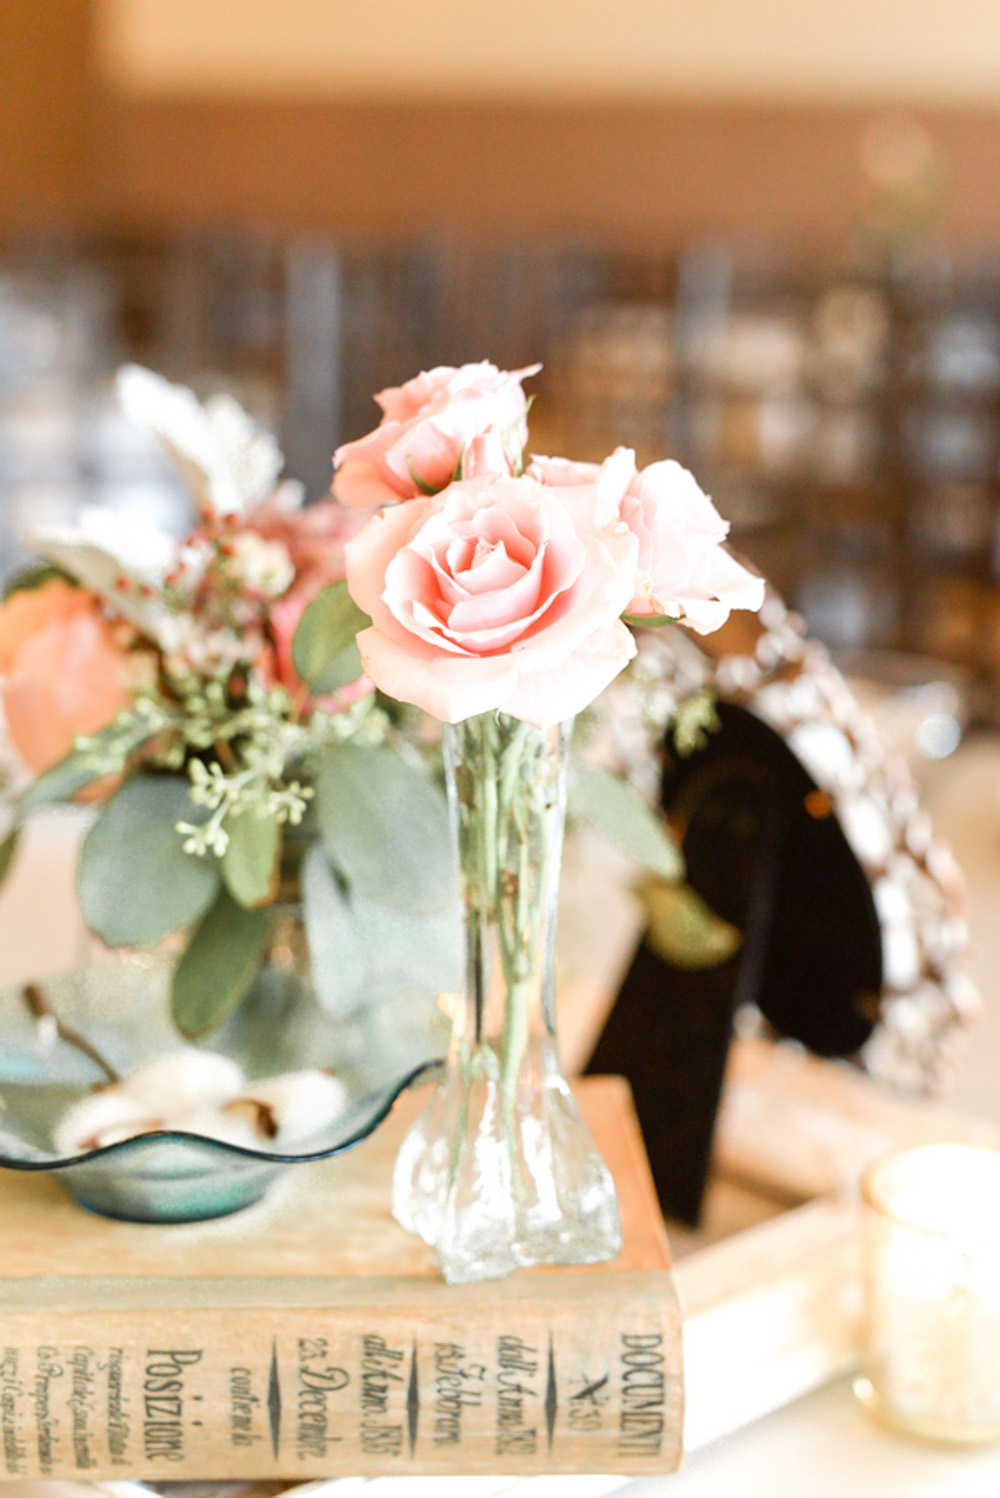 Blush and Grey Vintage Chic Inspired Wedding by Shively_Whitney_Monique_Hessler_Photography (18)